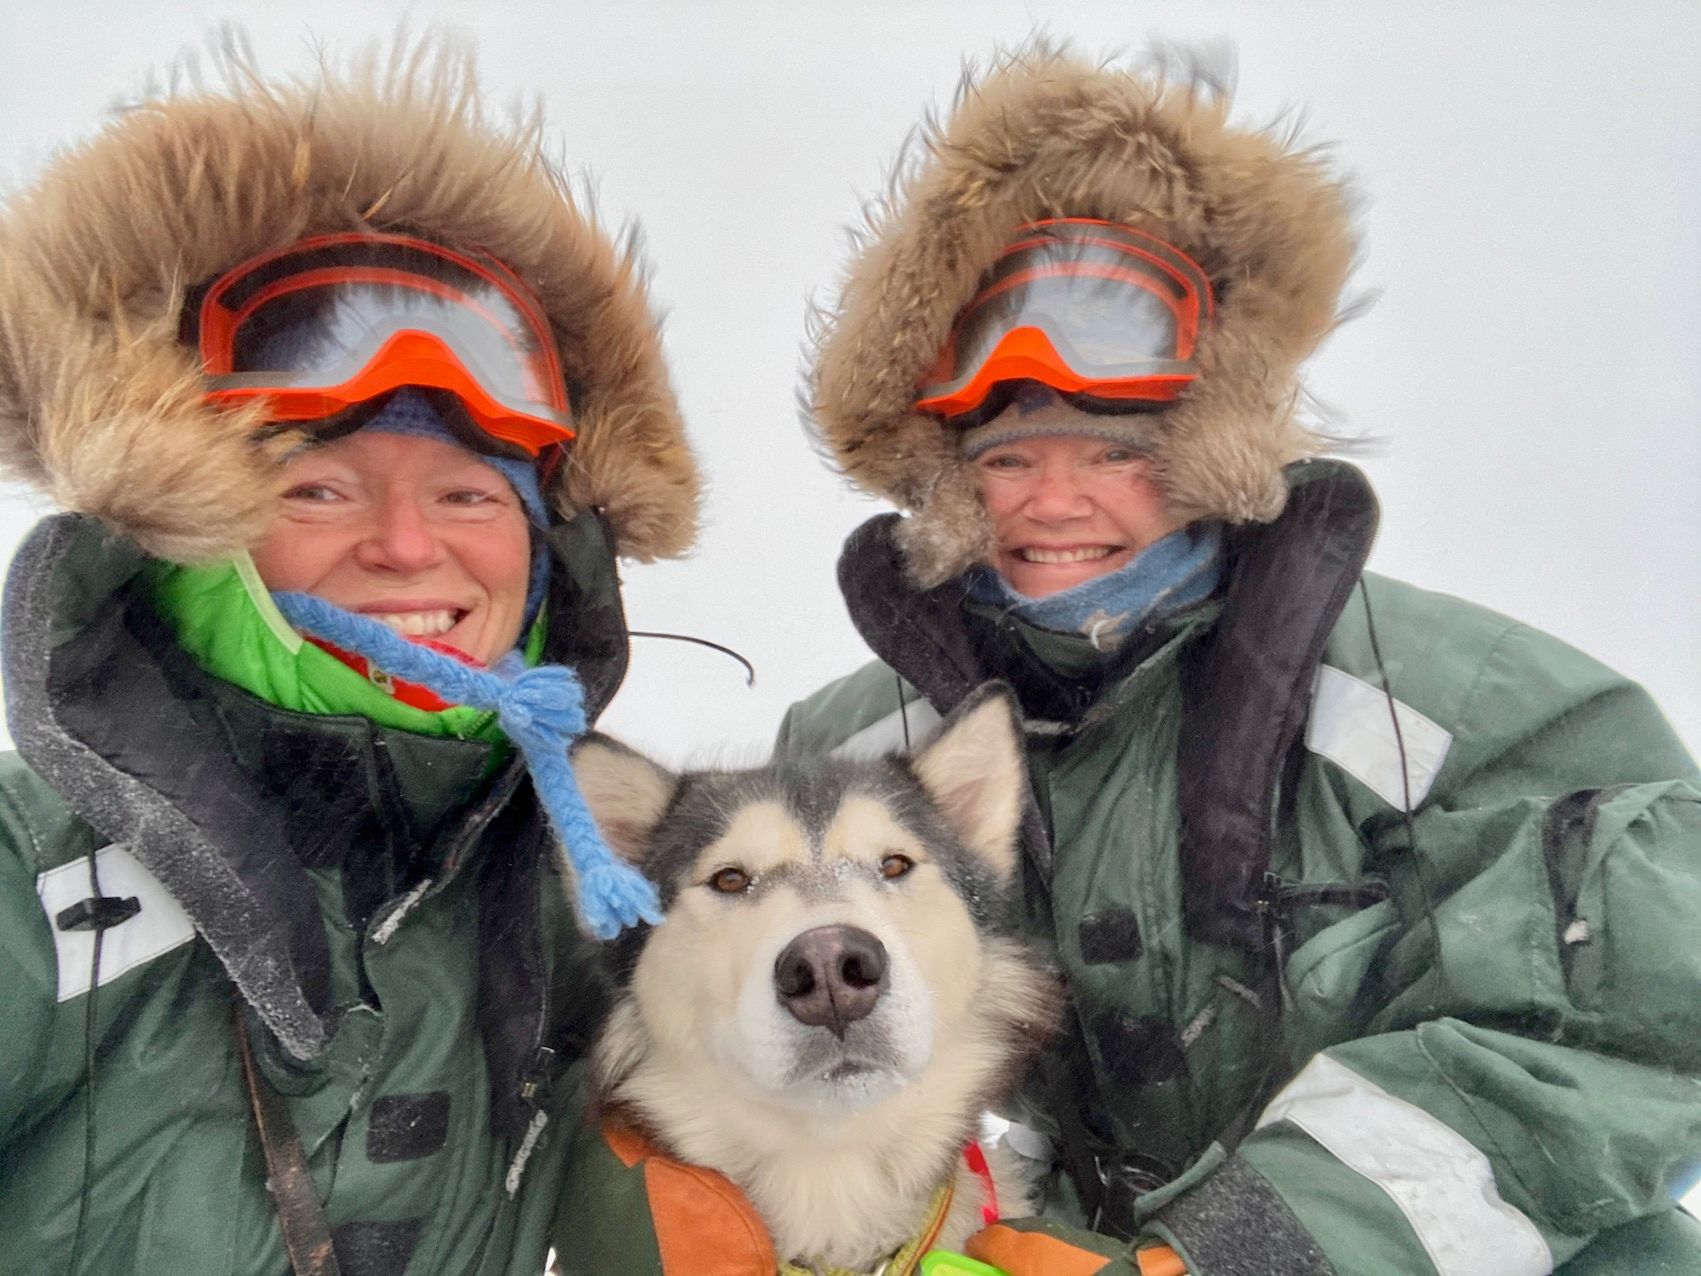 Hilde Fålun Strøm and Sunniva Sorby pose in the Arctic with their dog Ettra.